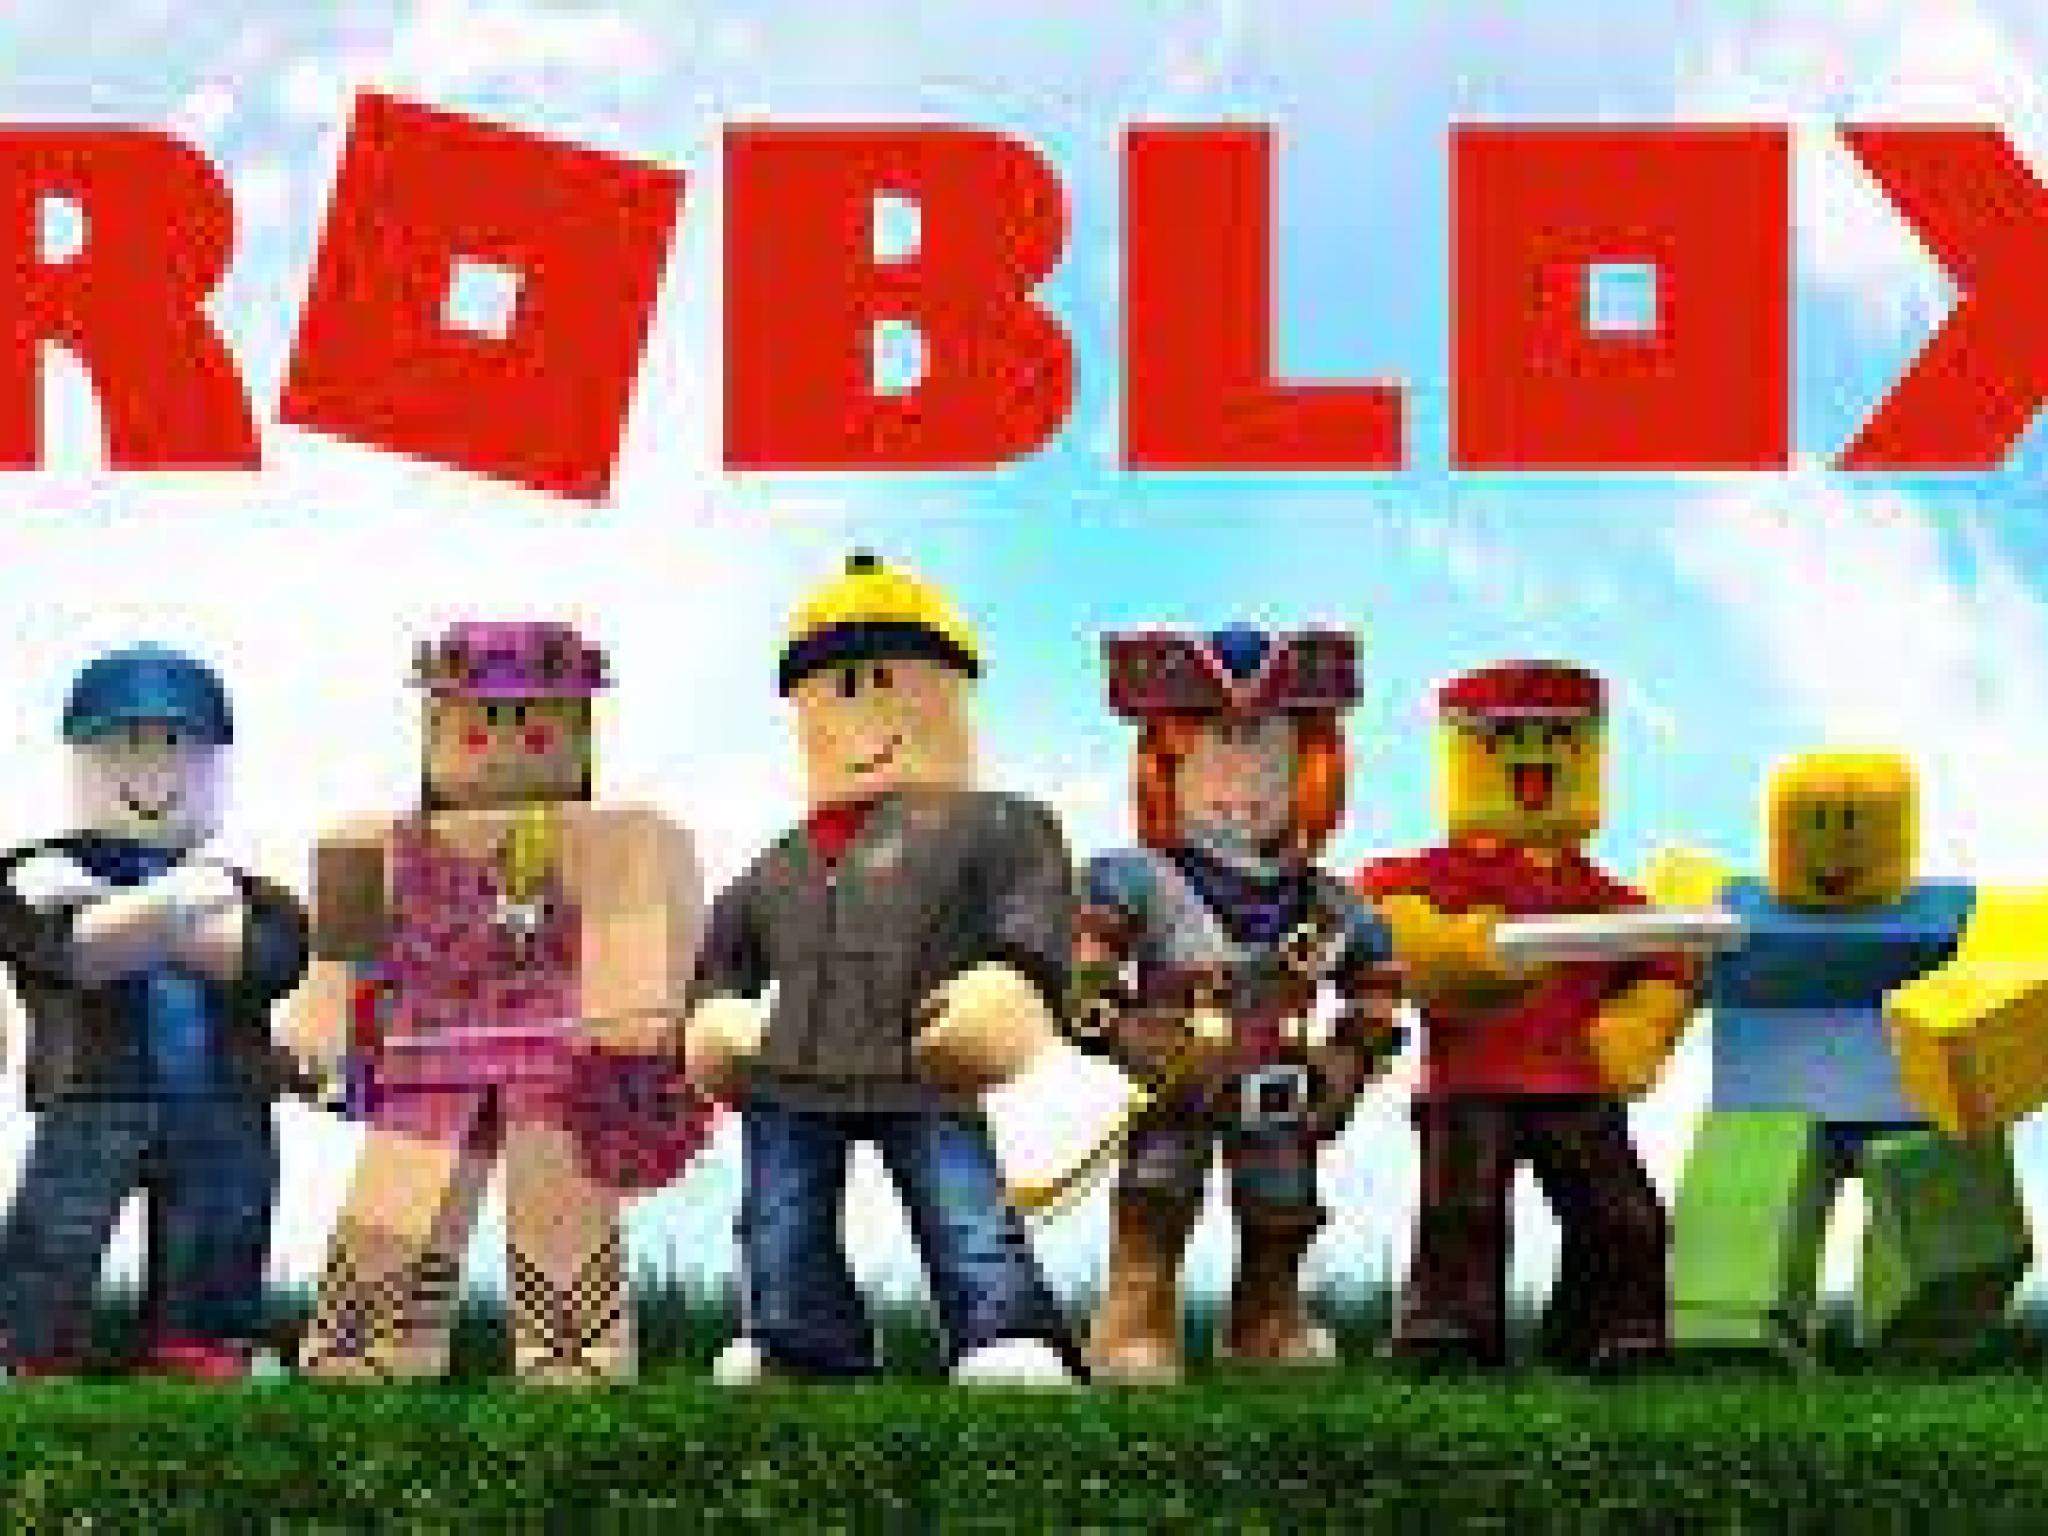  roblox-data-breach-thousands-of-developers-personal-information-leaked-company-faces-backlash-for-delayed-disclosure 